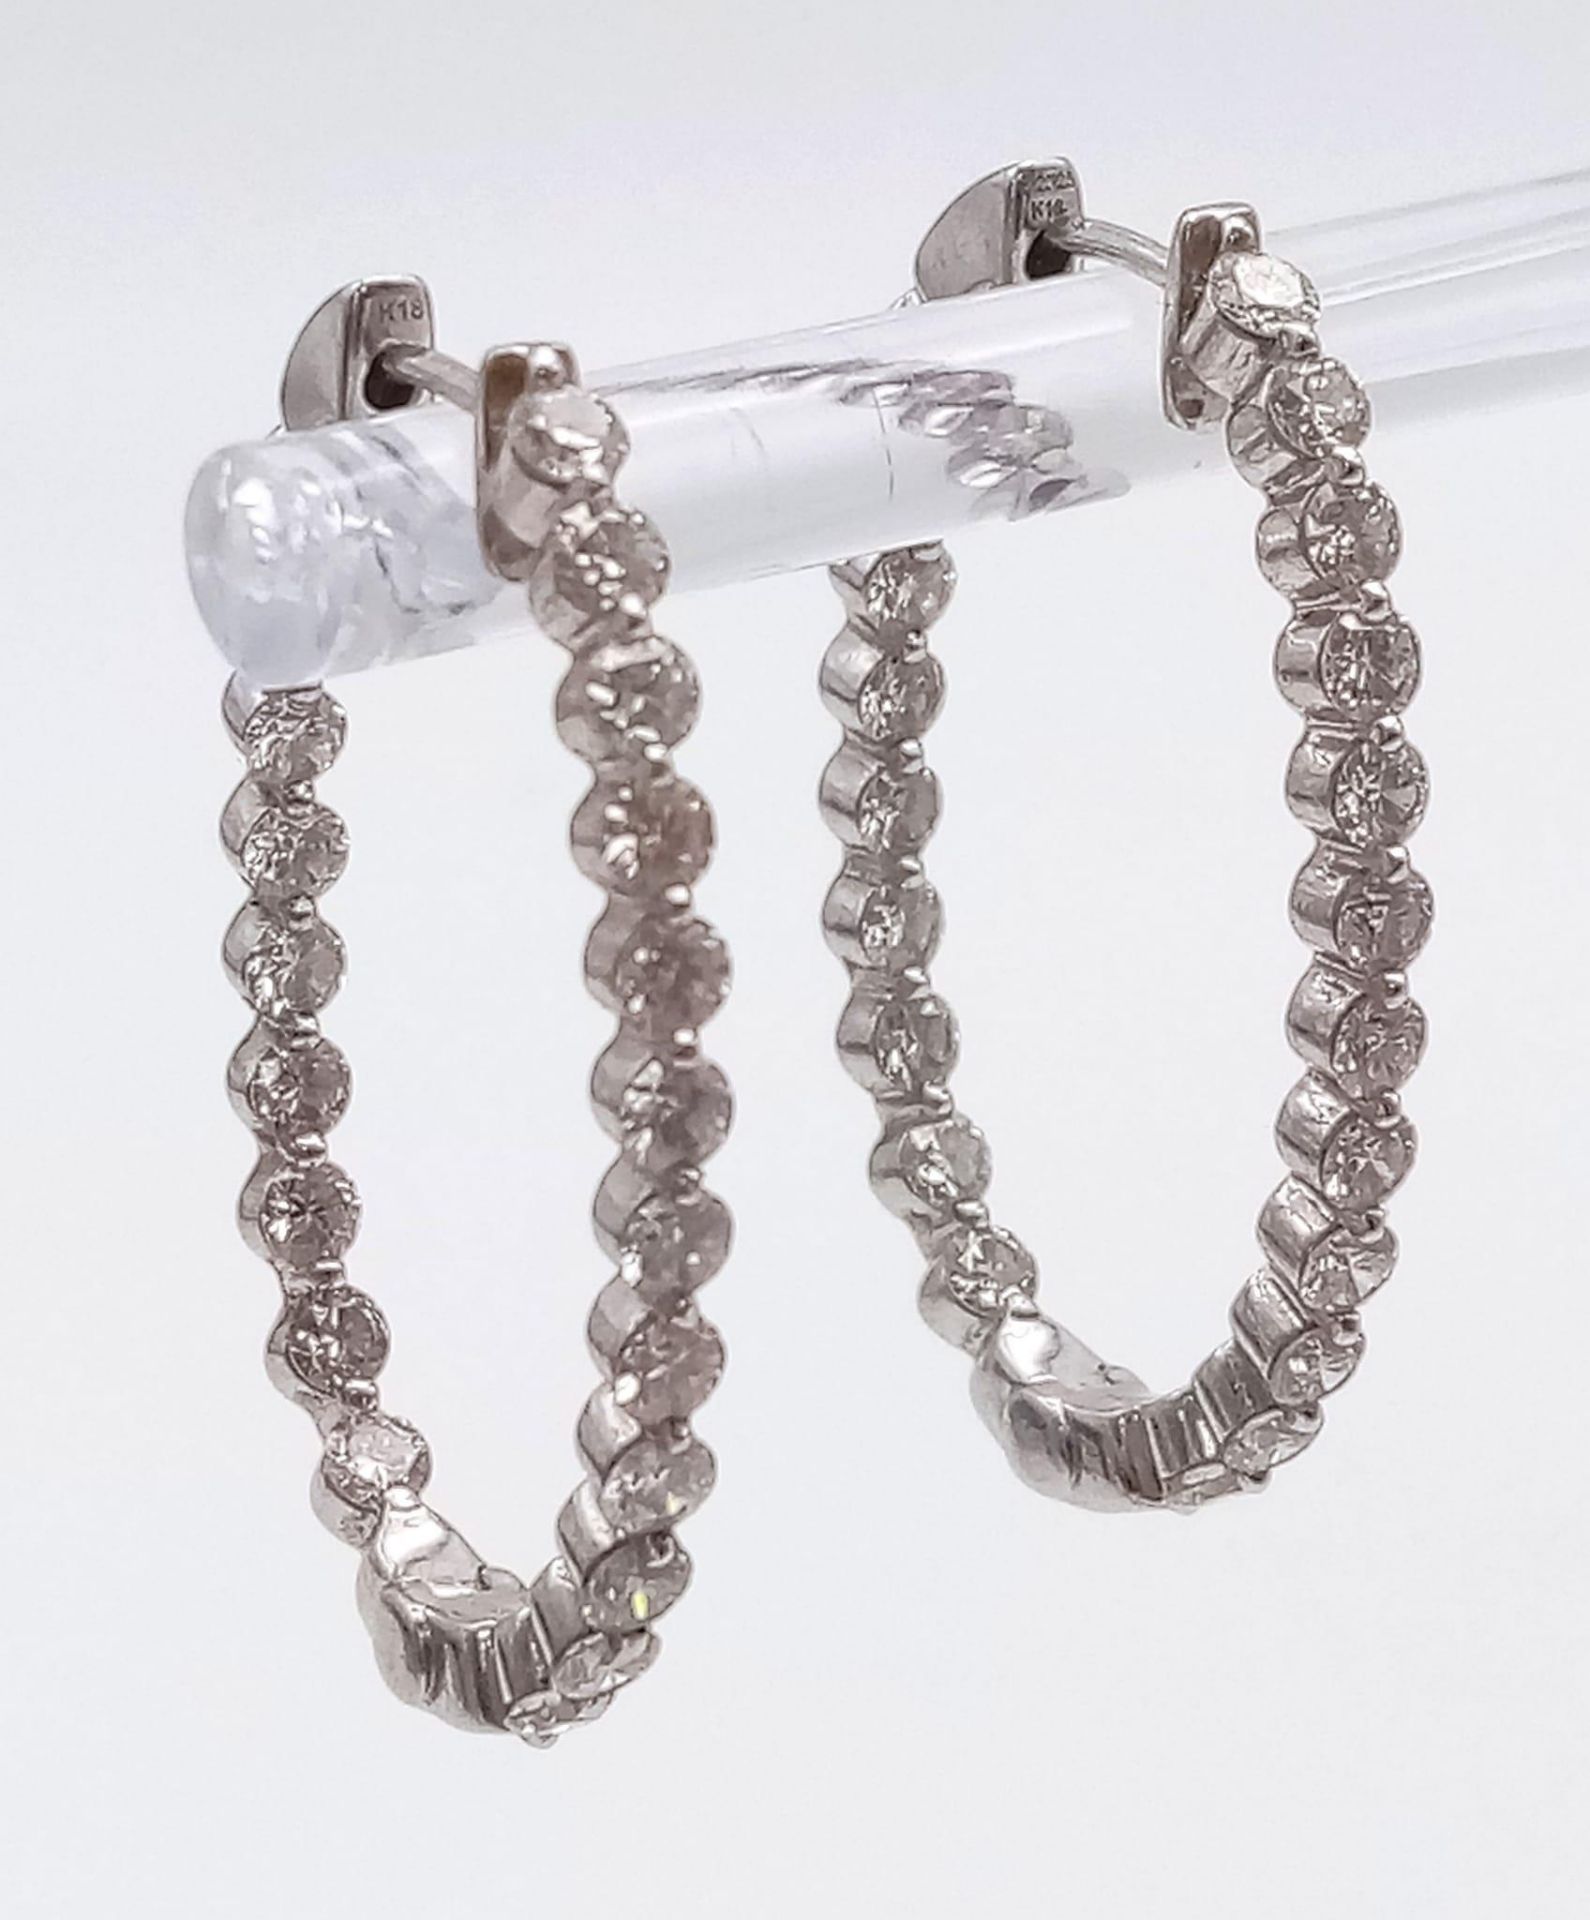 A PAIR OF 18K WHITE GOLD AND DIAMOND EARRINGS IN A HORSE SHOE HOOP SHAPE . 6.6gms 21 small